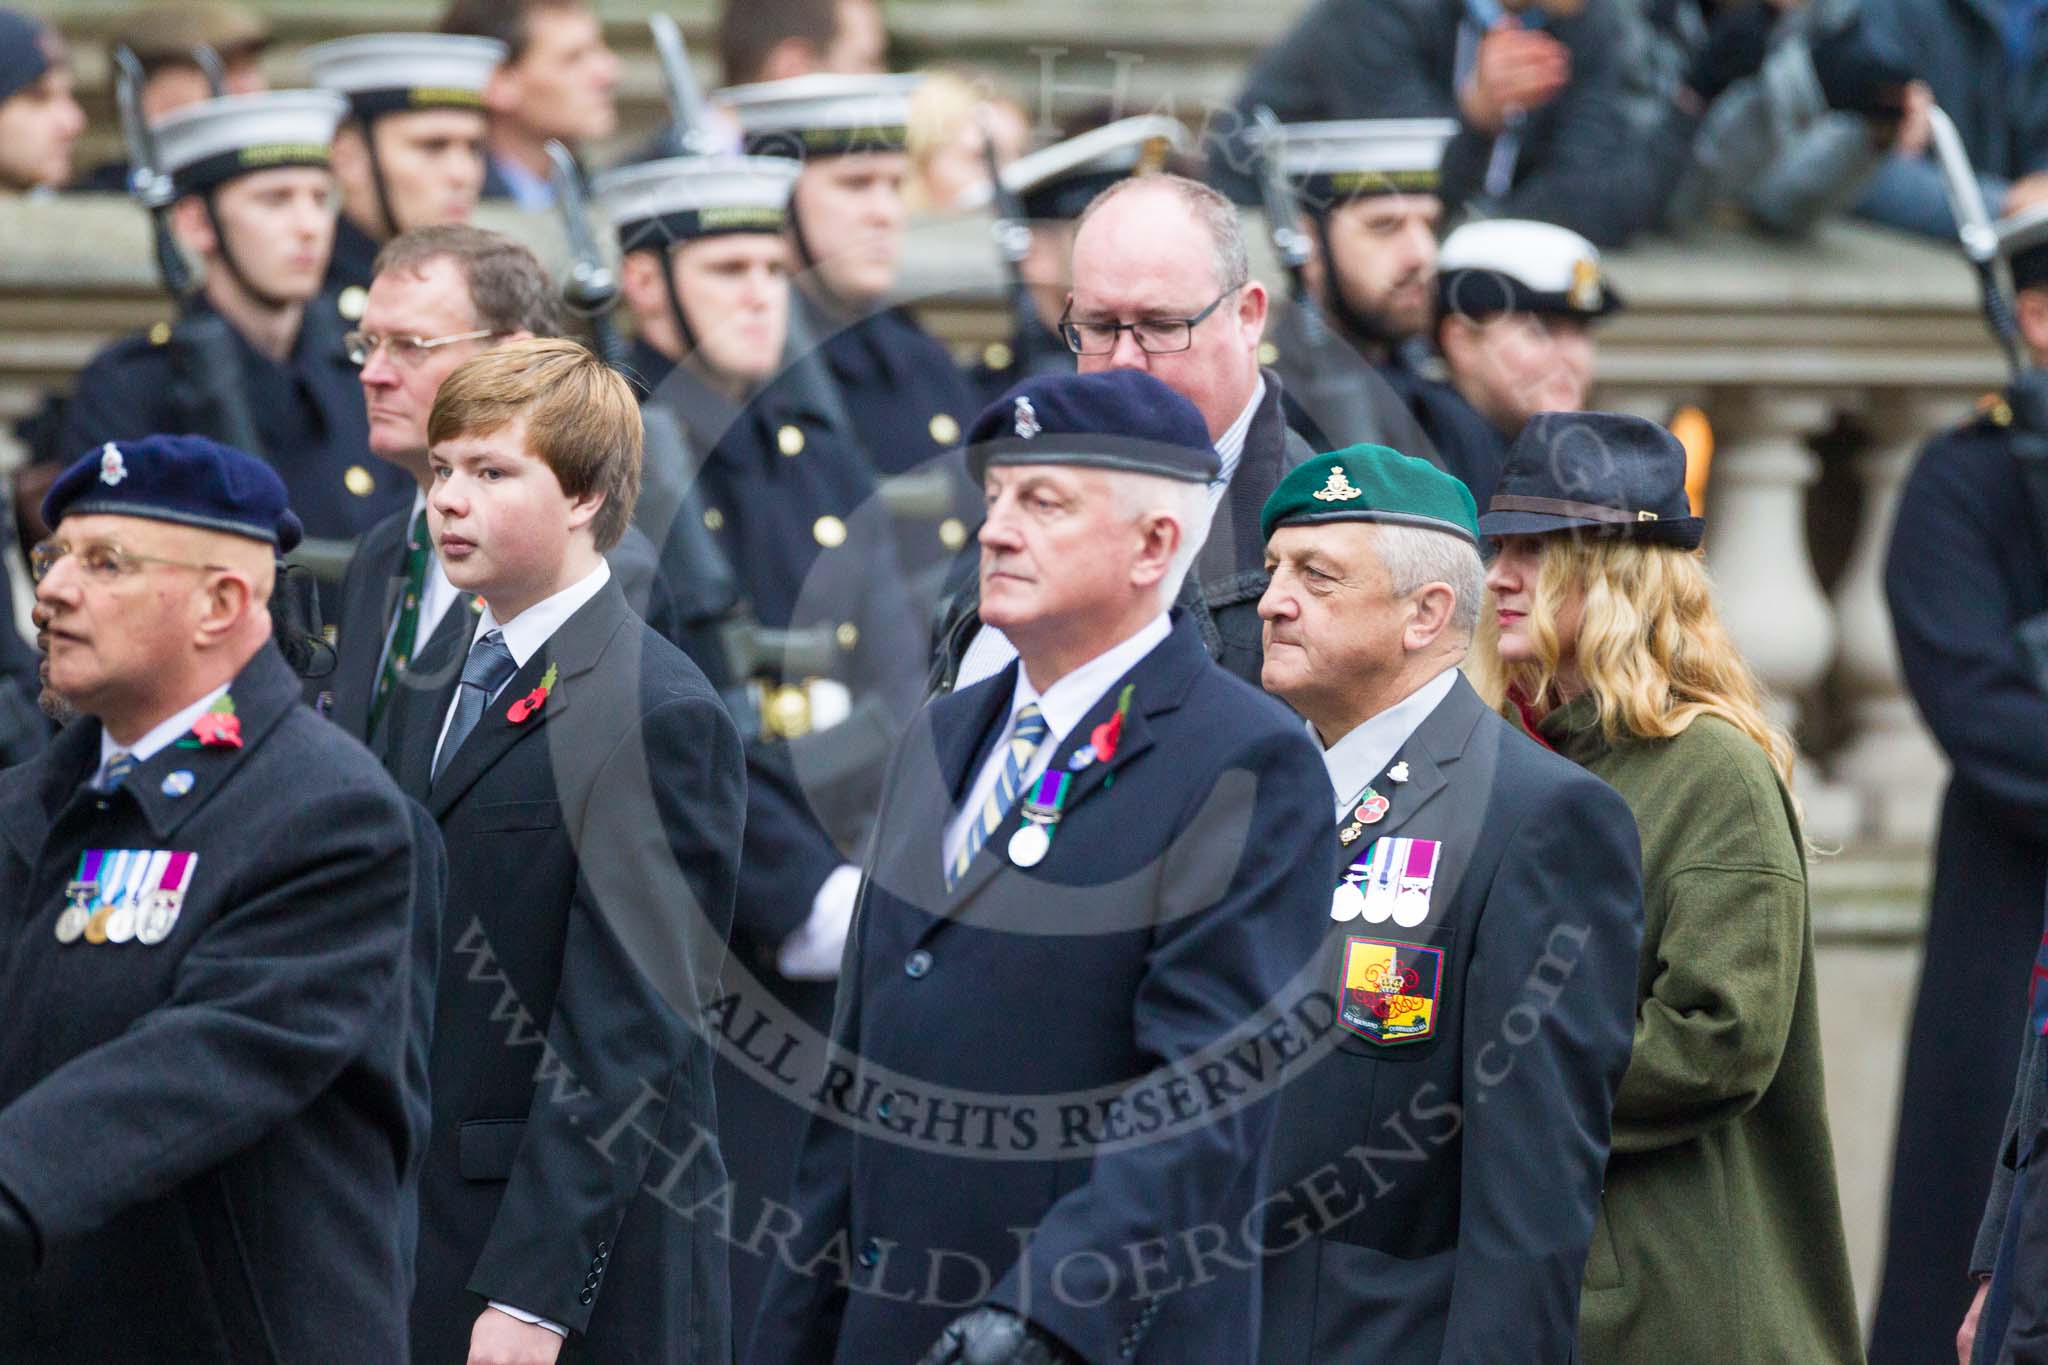 Remembrance Sunday at the Cenotaph 2015: Group B4, Royal Artillery Association.
Cenotaph, Whitehall, London SW1,
London,
Greater London,
United Kingdom,
on 08 November 2015 at 11:36, image #33